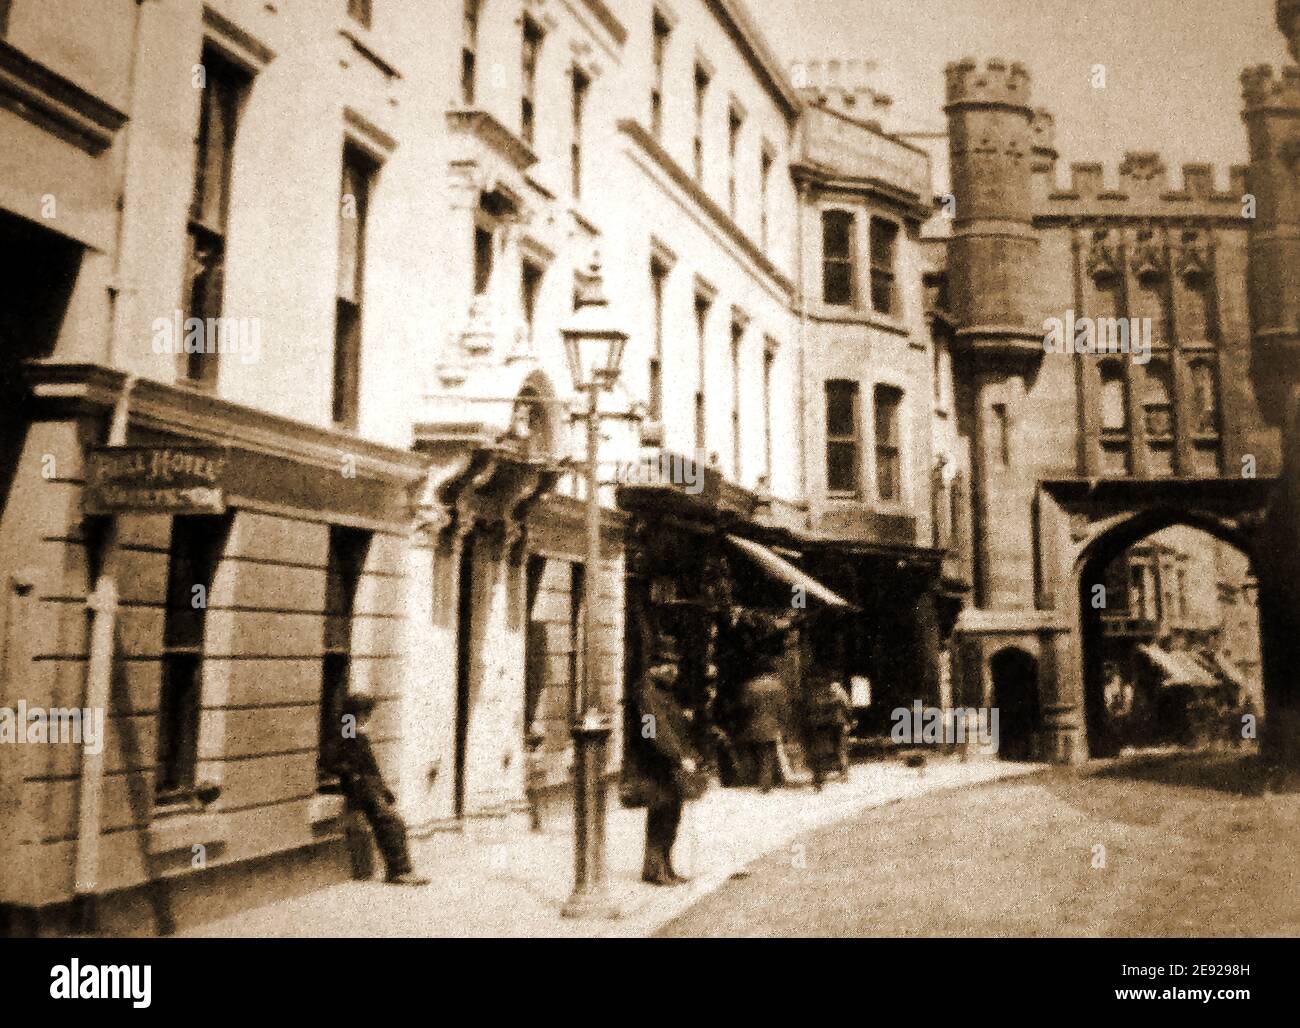 An old photograph taken in Scarborough, North Yorkshire, UK, showing  the former (rebuilt) Newborough Bar which was part of the old town walls.  The Bull Inn is situated to the left . The bar with its archway  containing the town's jail was rebuilt in 1843 with turrets. In the distance, now out of view,  is Scarborough Castle and its walls which were greatly damaged during the bombardment of Scarborough by German Warships in WWI. Stock Photo